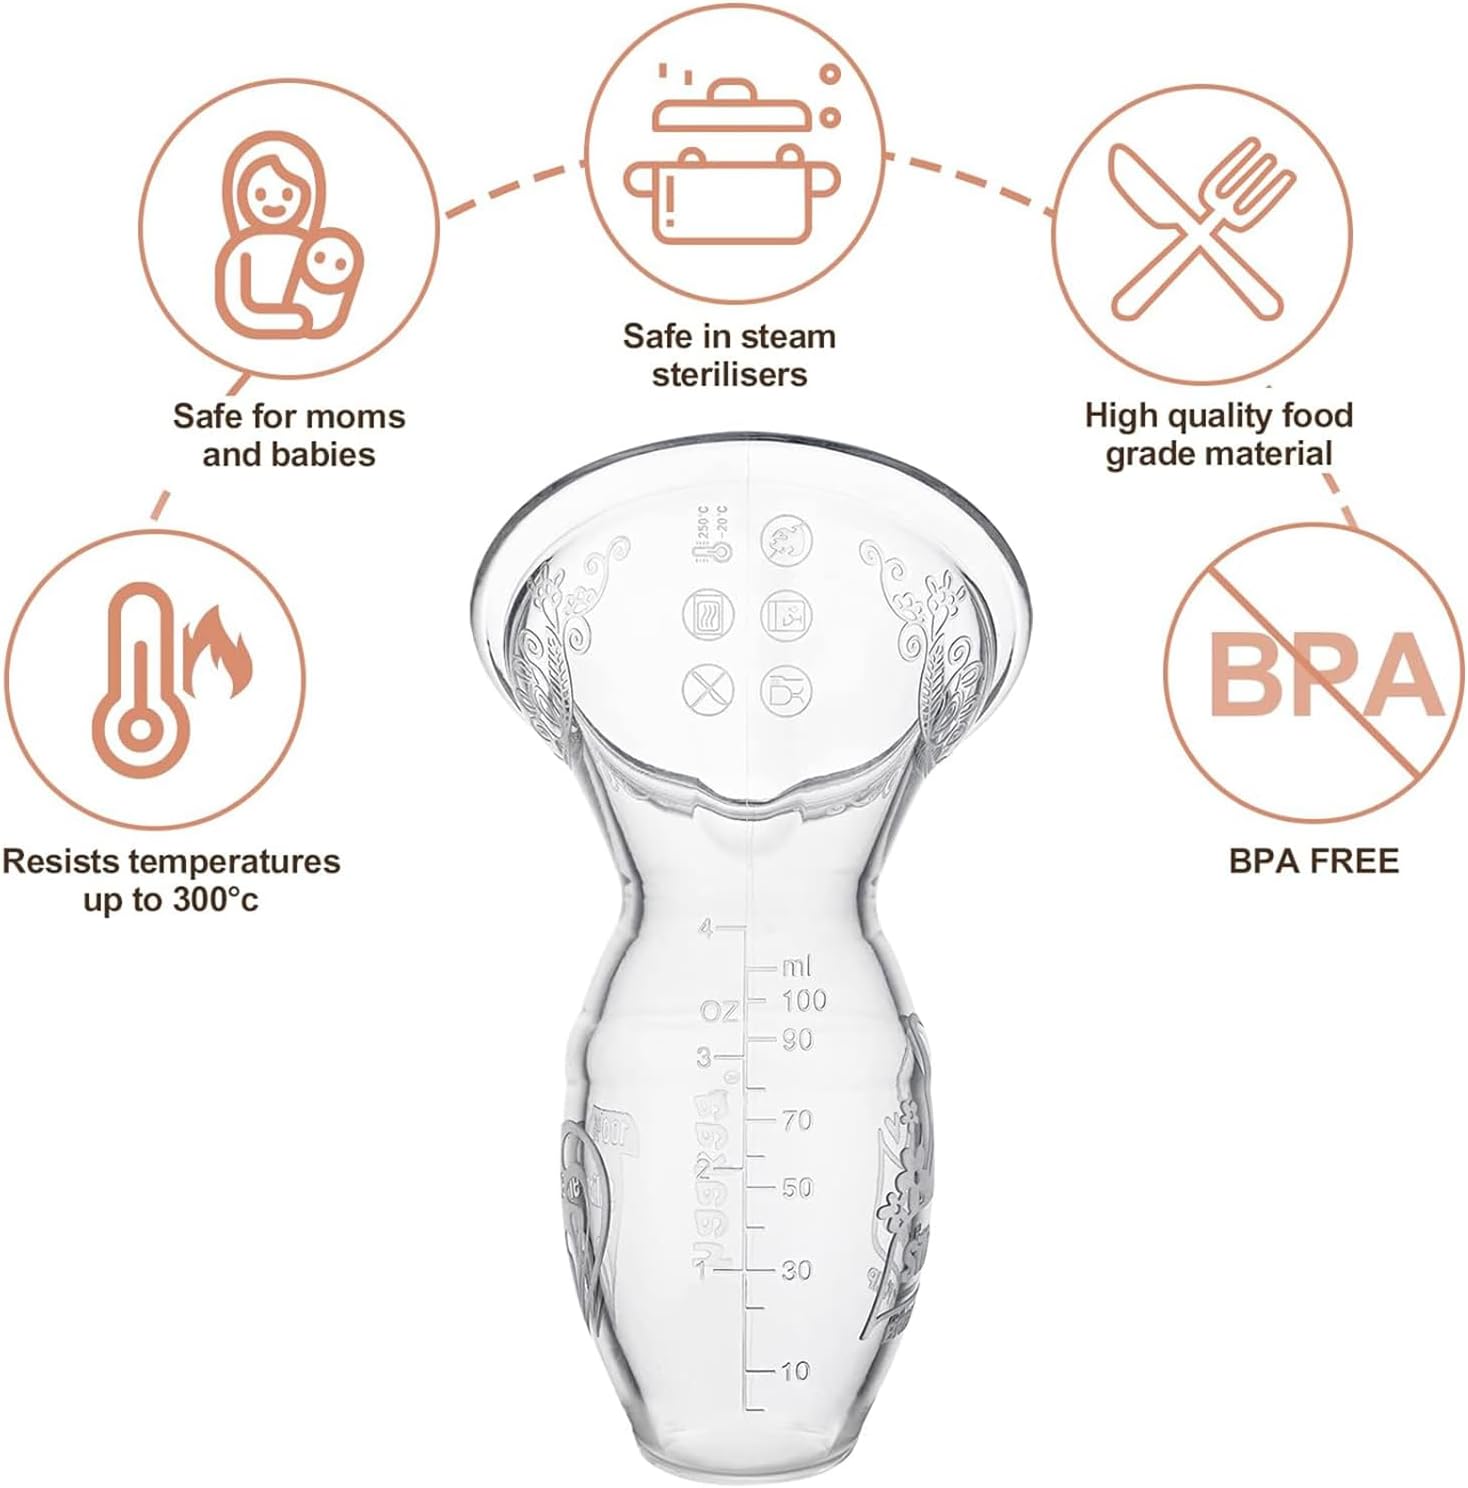 HAAKAA Silicone Breast Pump, Clear, 4 Ounce, Pack of 1